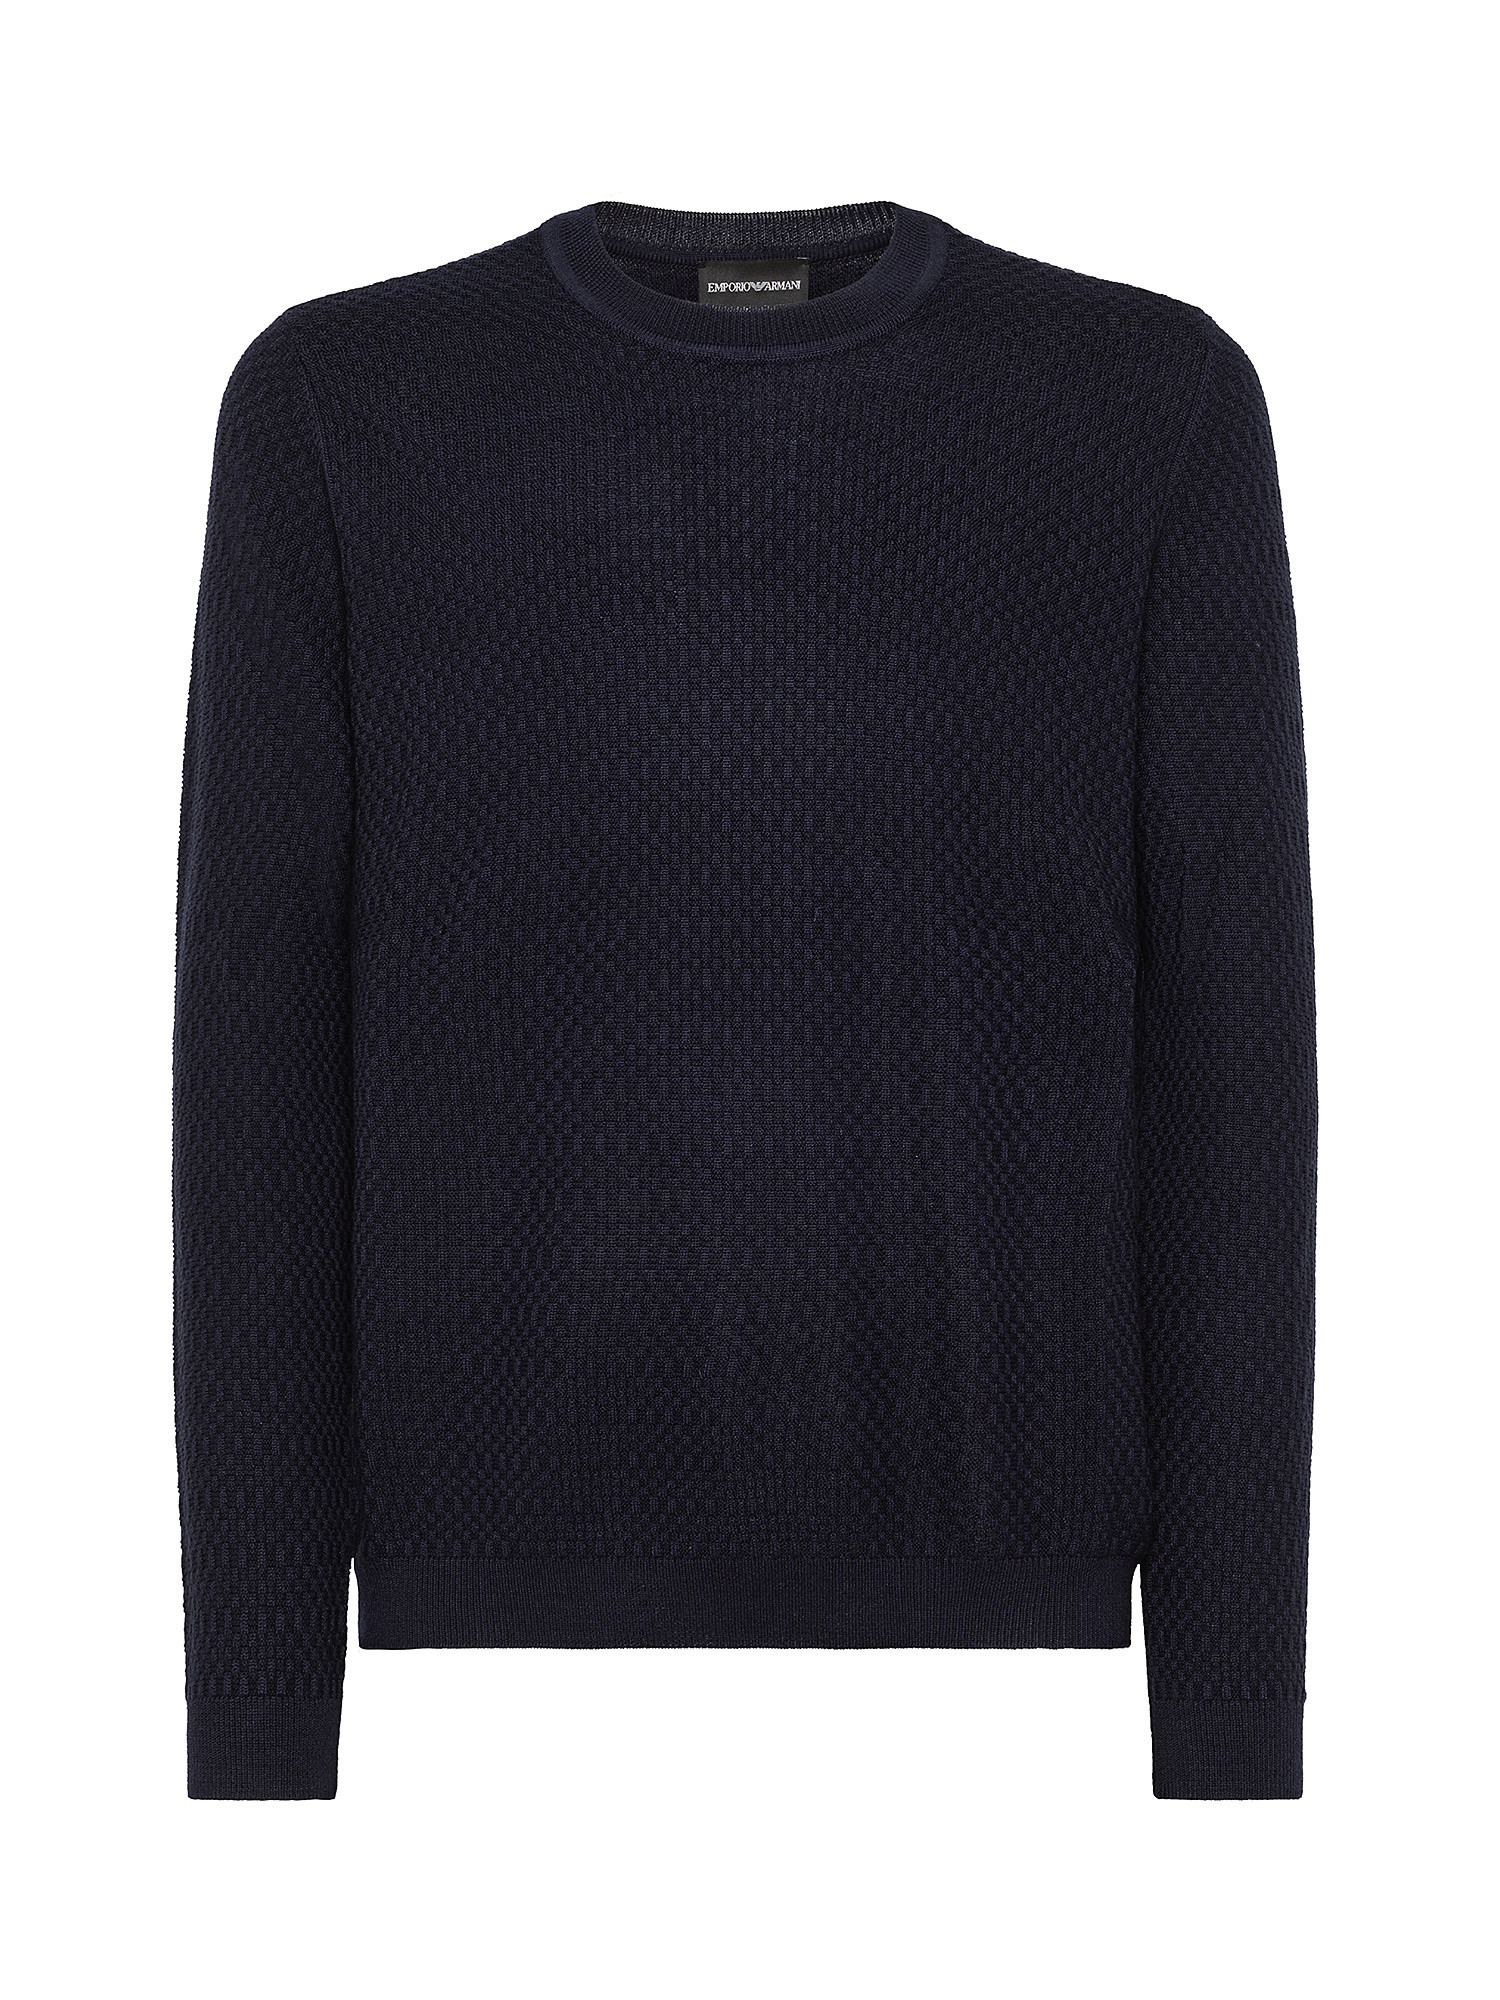 Crewneck sweater in wool blend, Blue, large image number 0